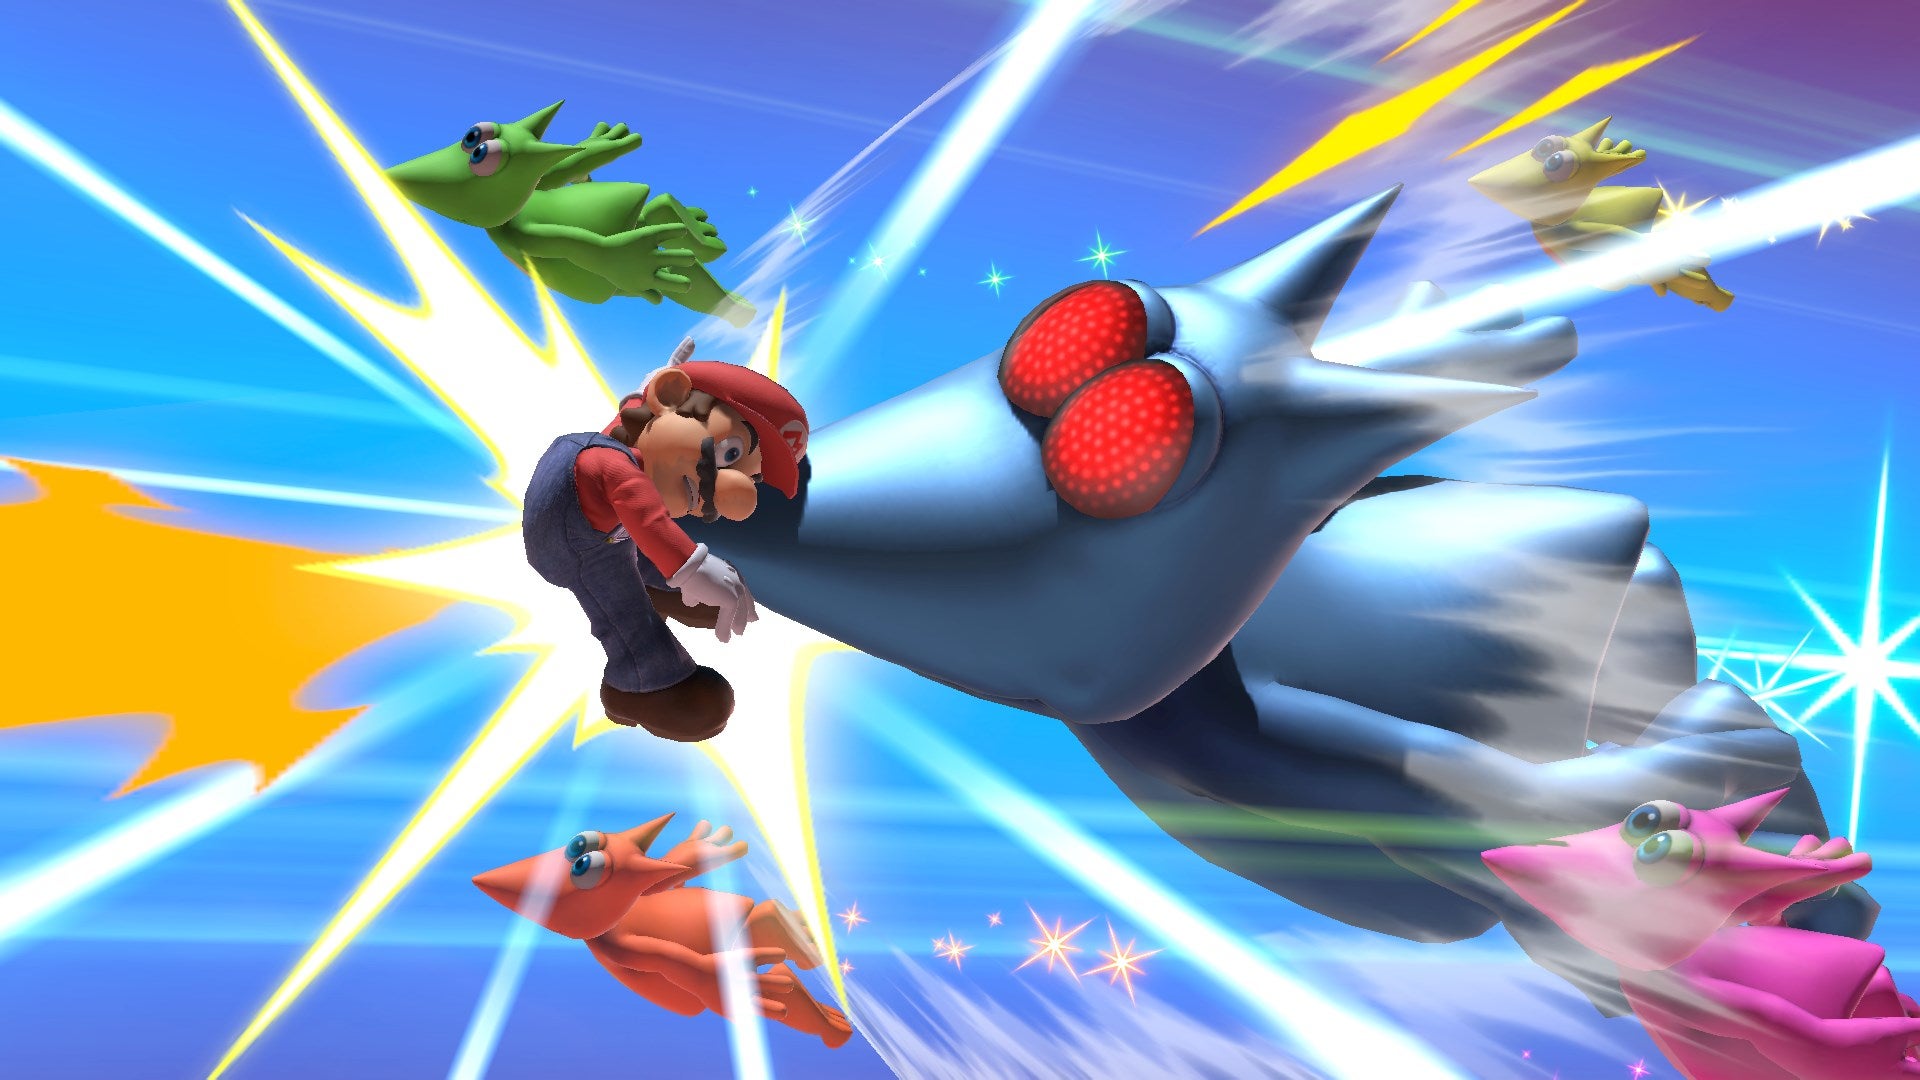 Image for Watch Super Smash Bros. Ultimate's new Arms character reveal here today